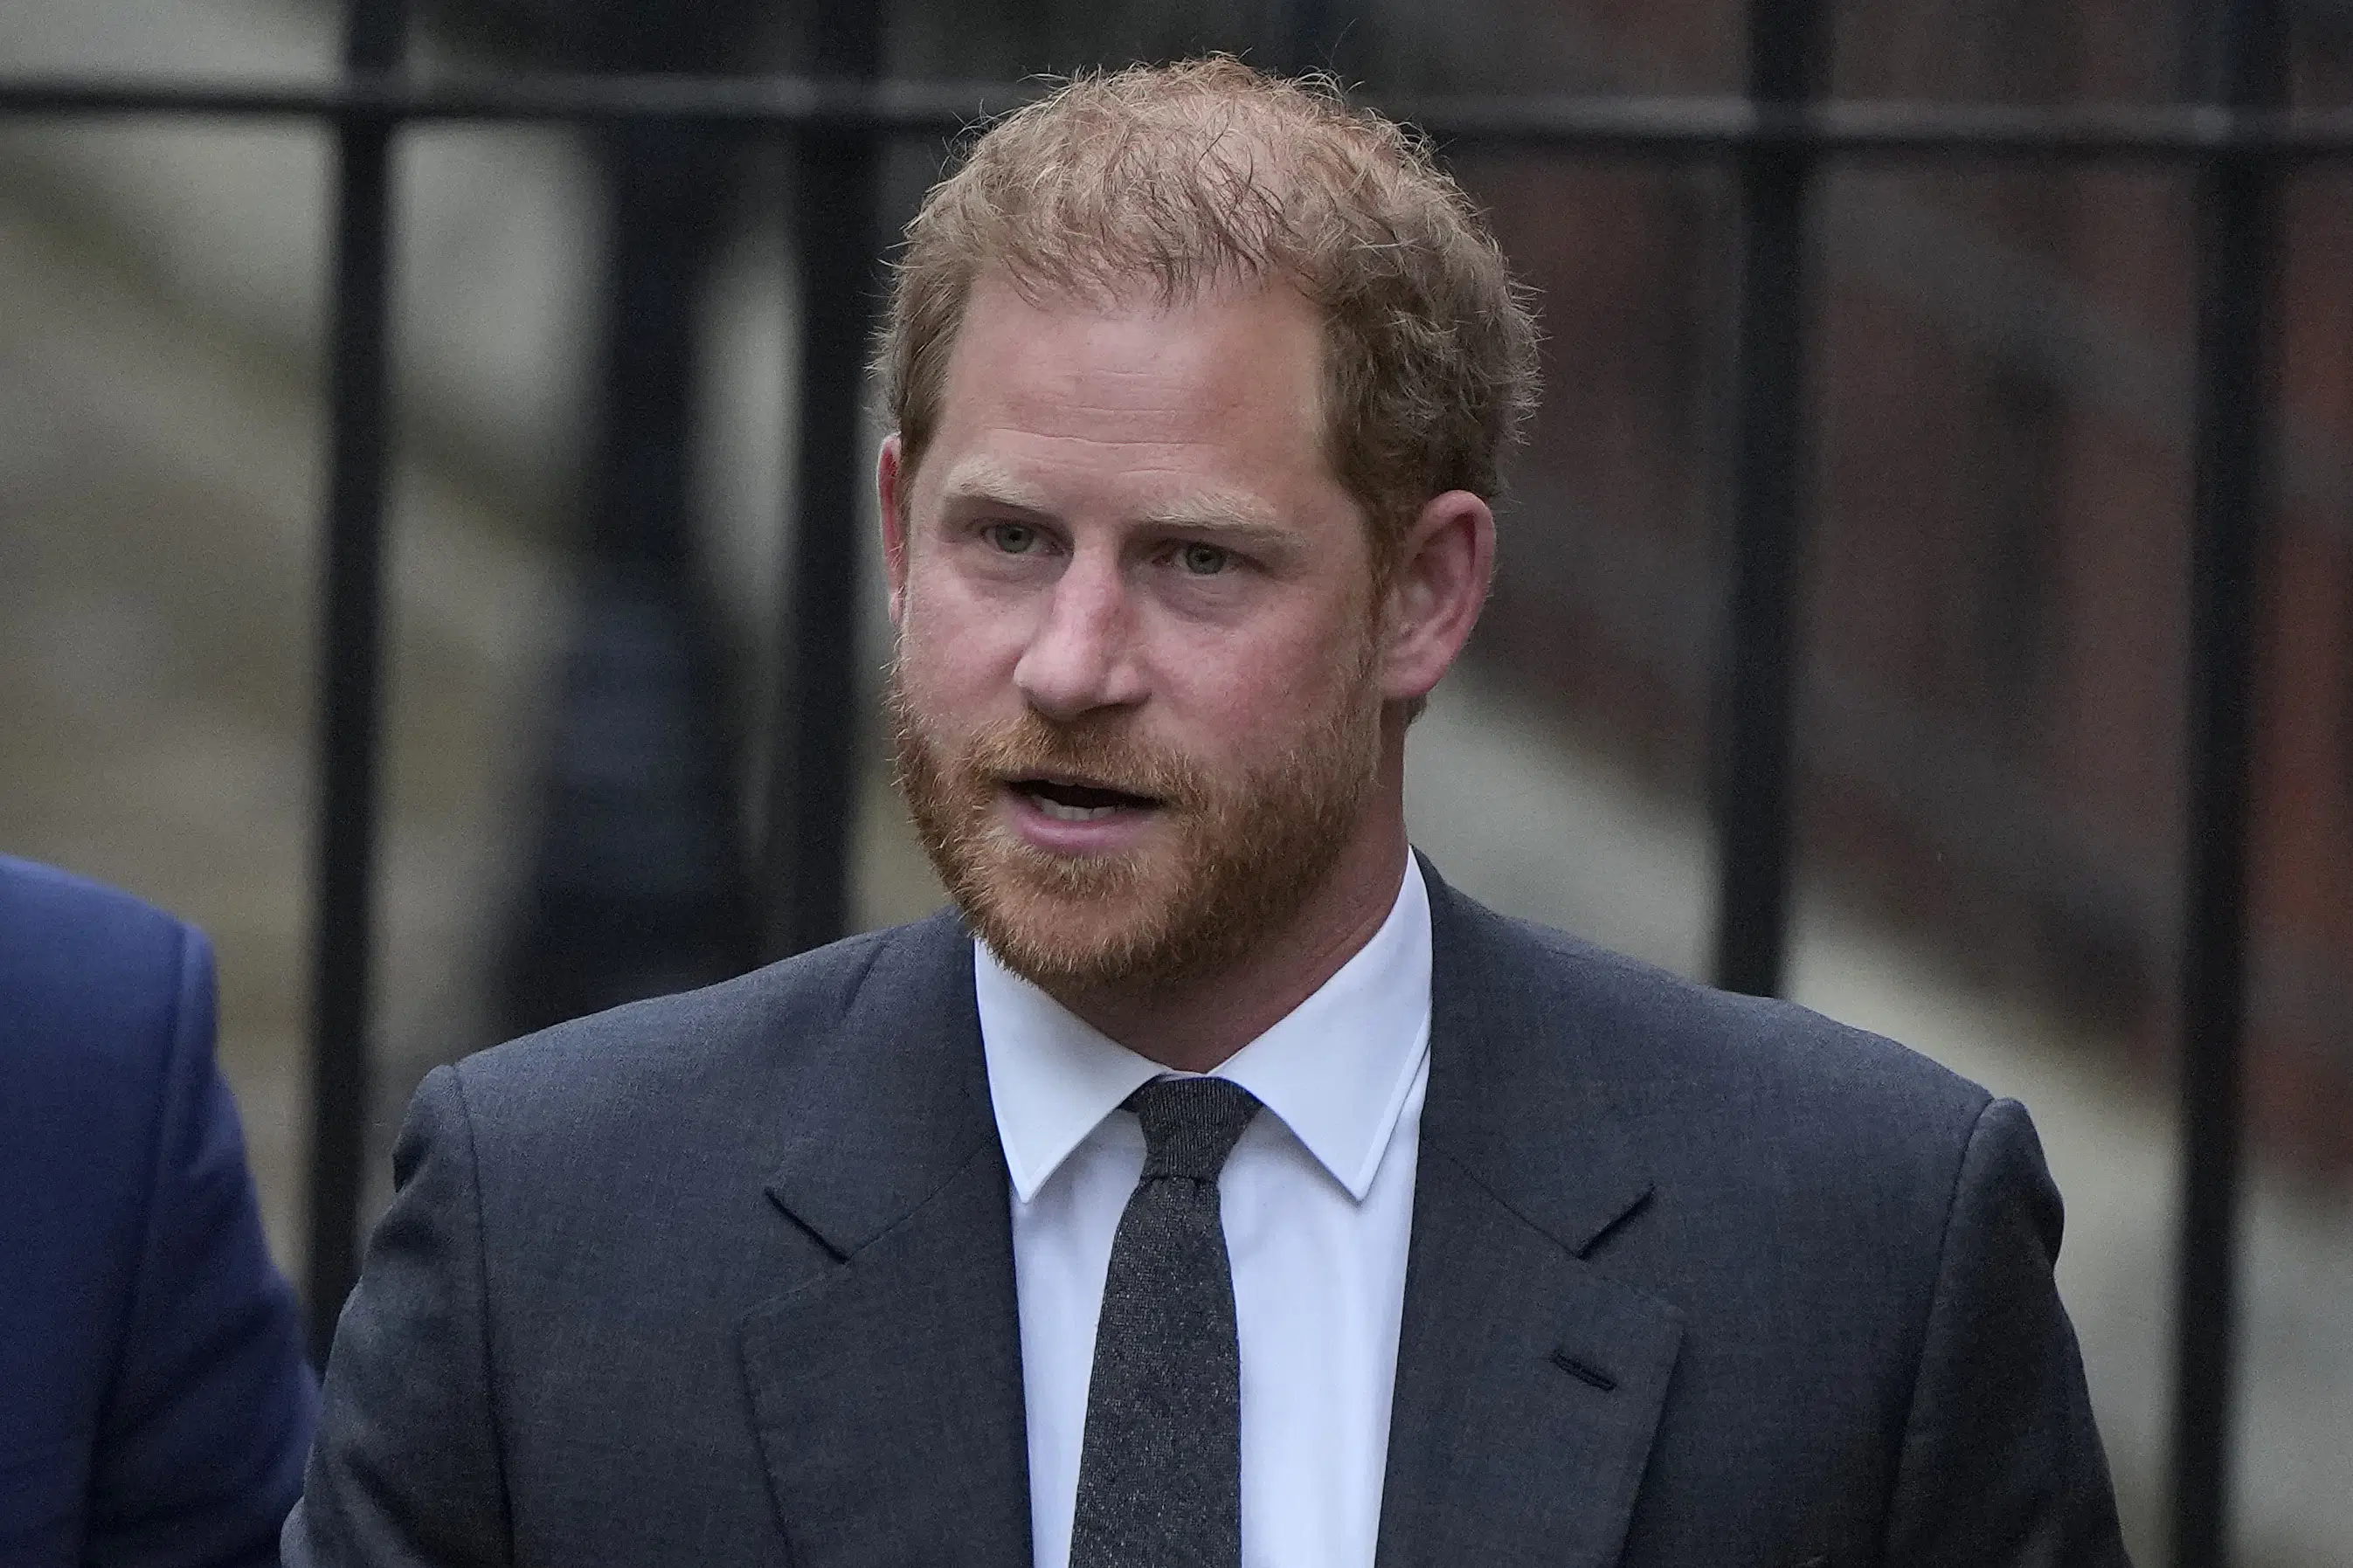 Watch Prince Harry returns to court in tabloid phone hacking case – Latest Entertainment News